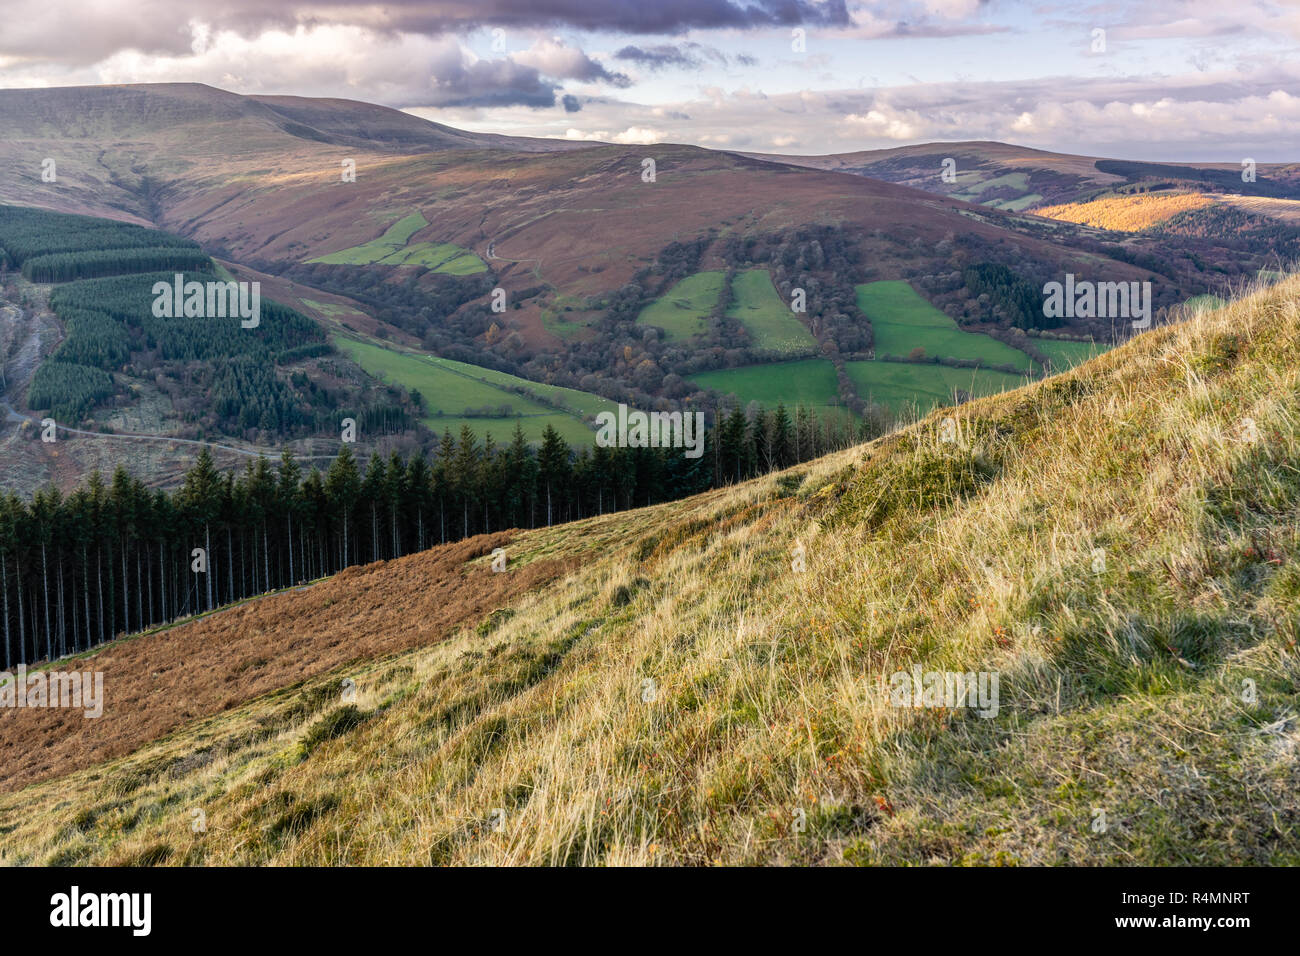 View from Tor-y-foel mountain in the Brecon Beacons National Park, Powys, Wales, UK Stock Photo